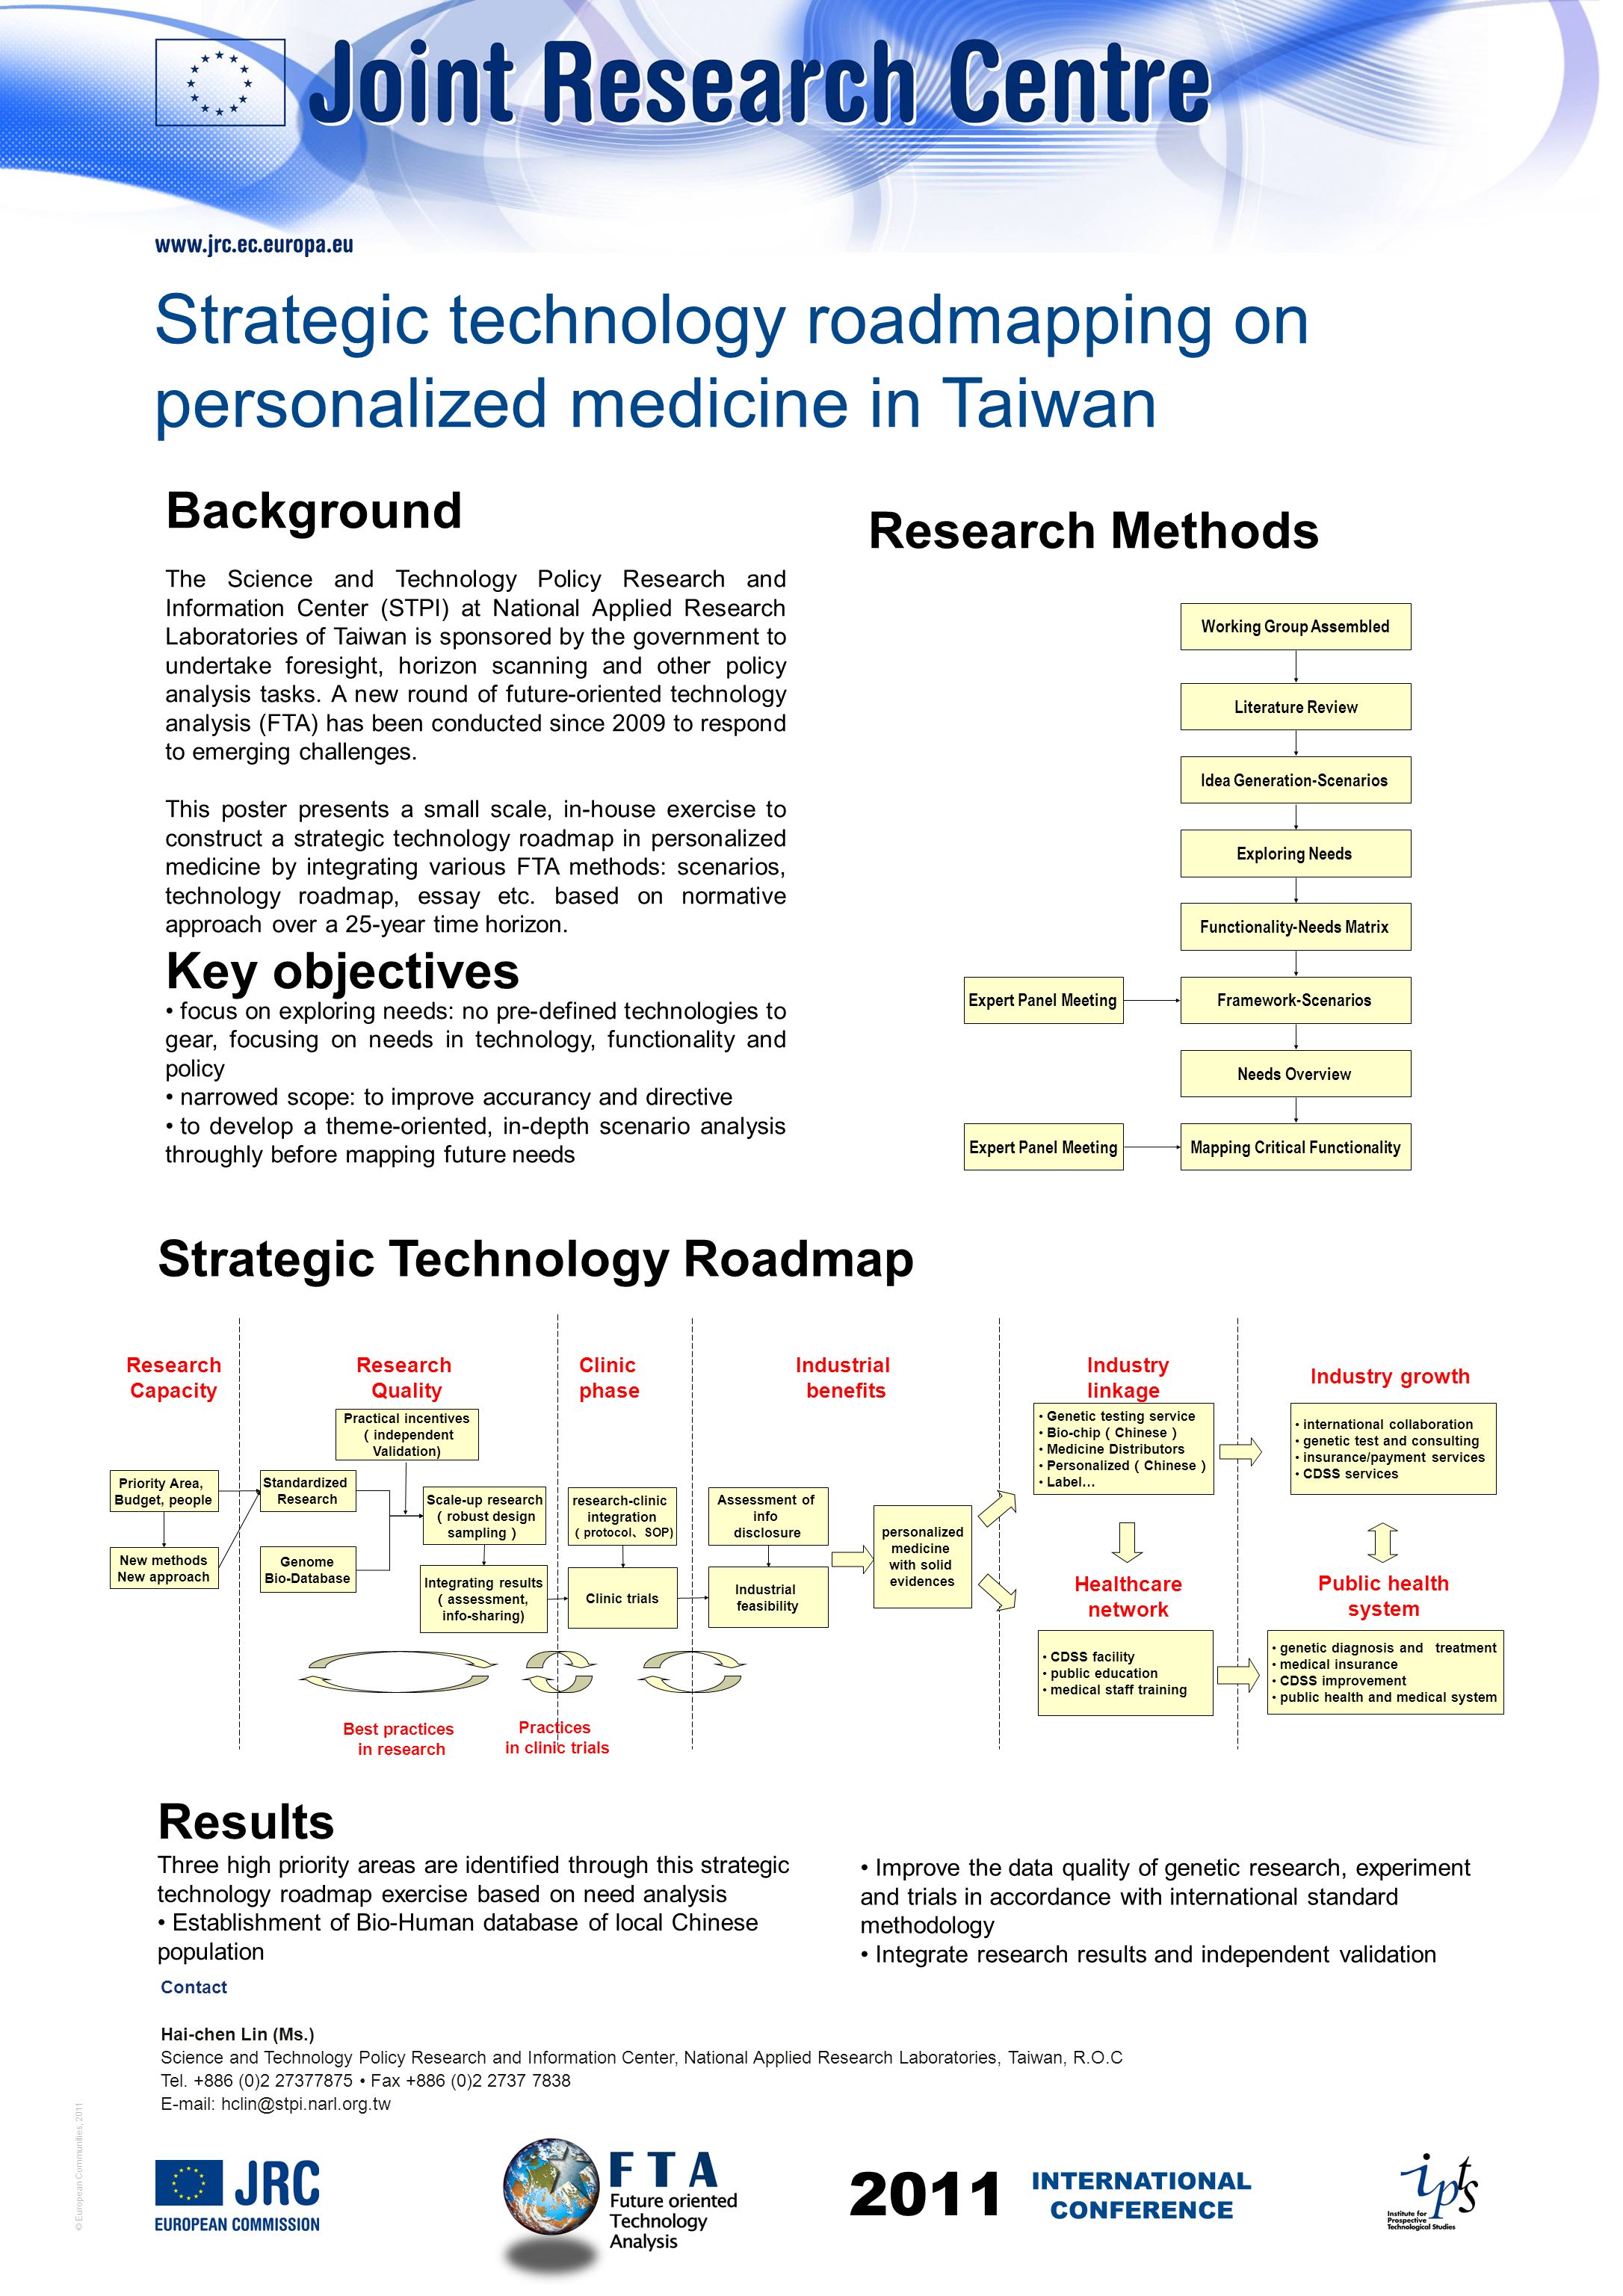 © European Communities, 2011 Background The Science and Technology Policy Research and Information Center (STPI) at National Applied Research Laboratories of Taiwan is sponsored by the government to undertake foresight, horizon scanning and other policy analysis tasks.